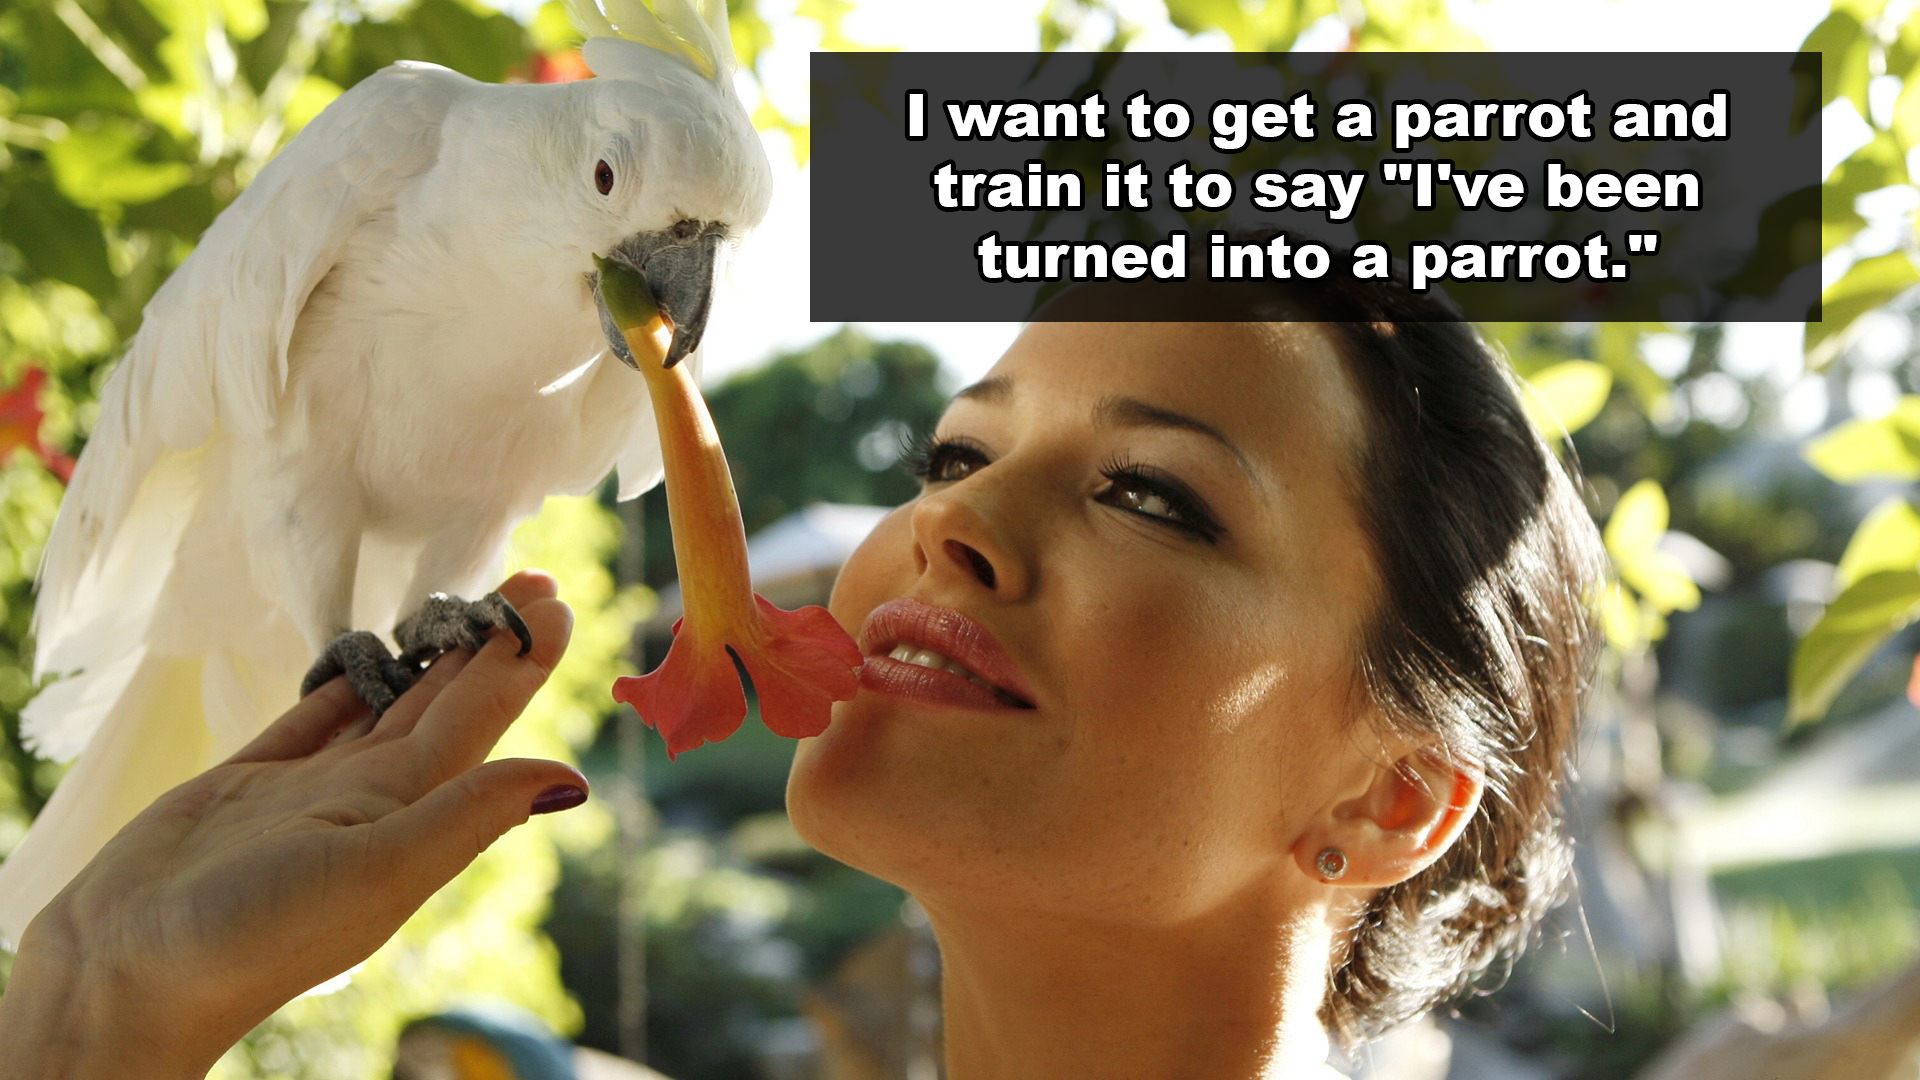 I want to get a parrot and train it to say "I've been turned into a parrot."